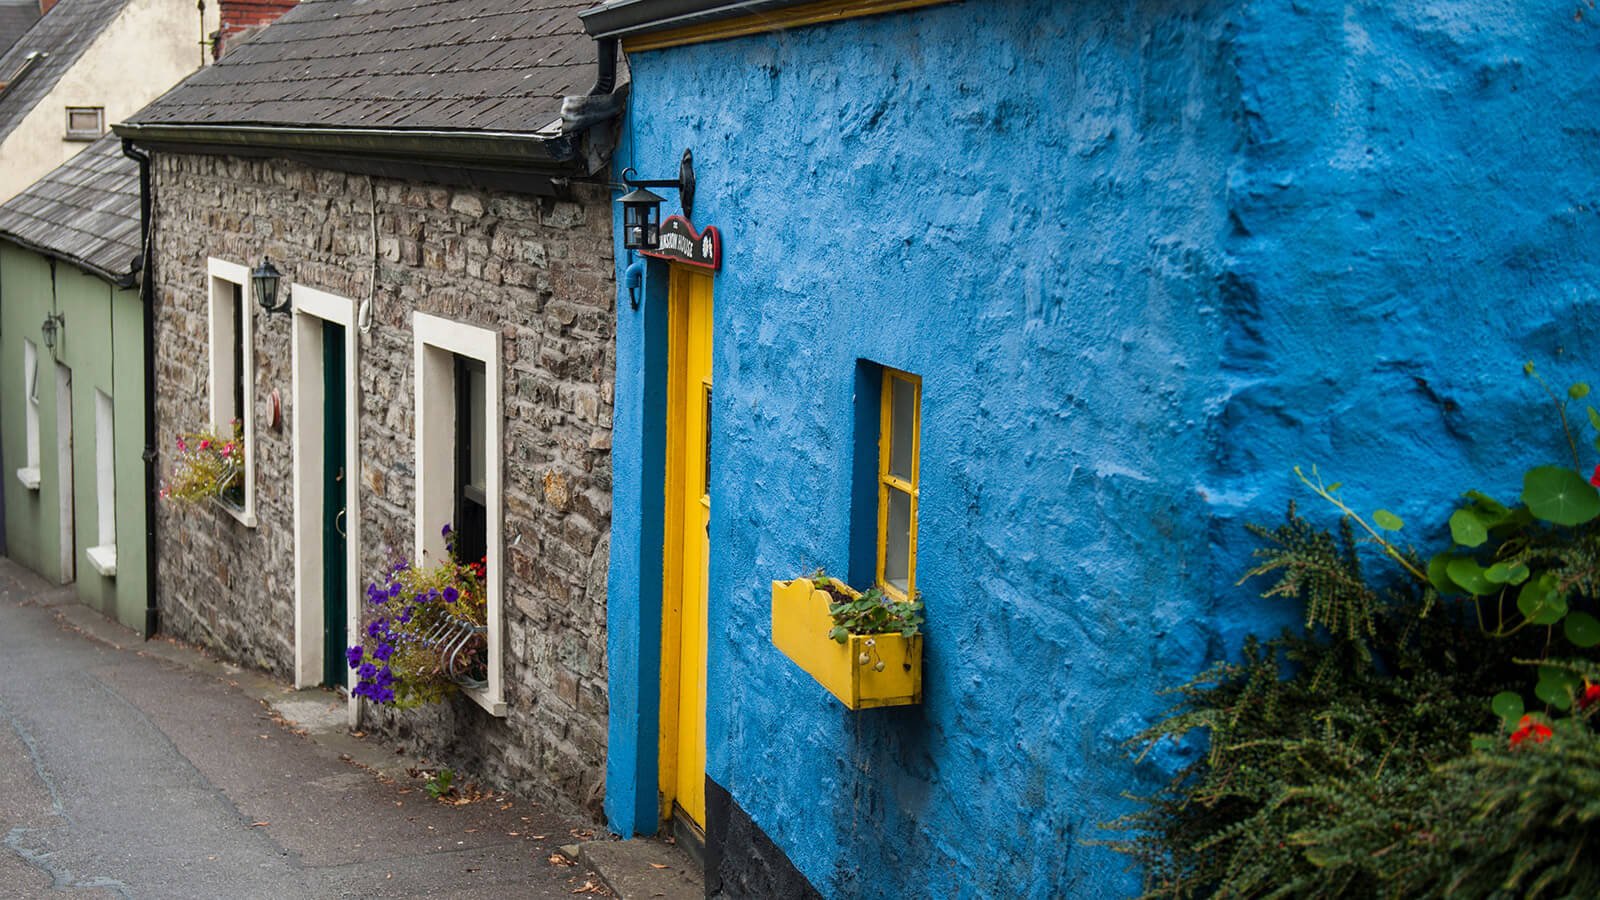 Colourful row of houses in Kinsale